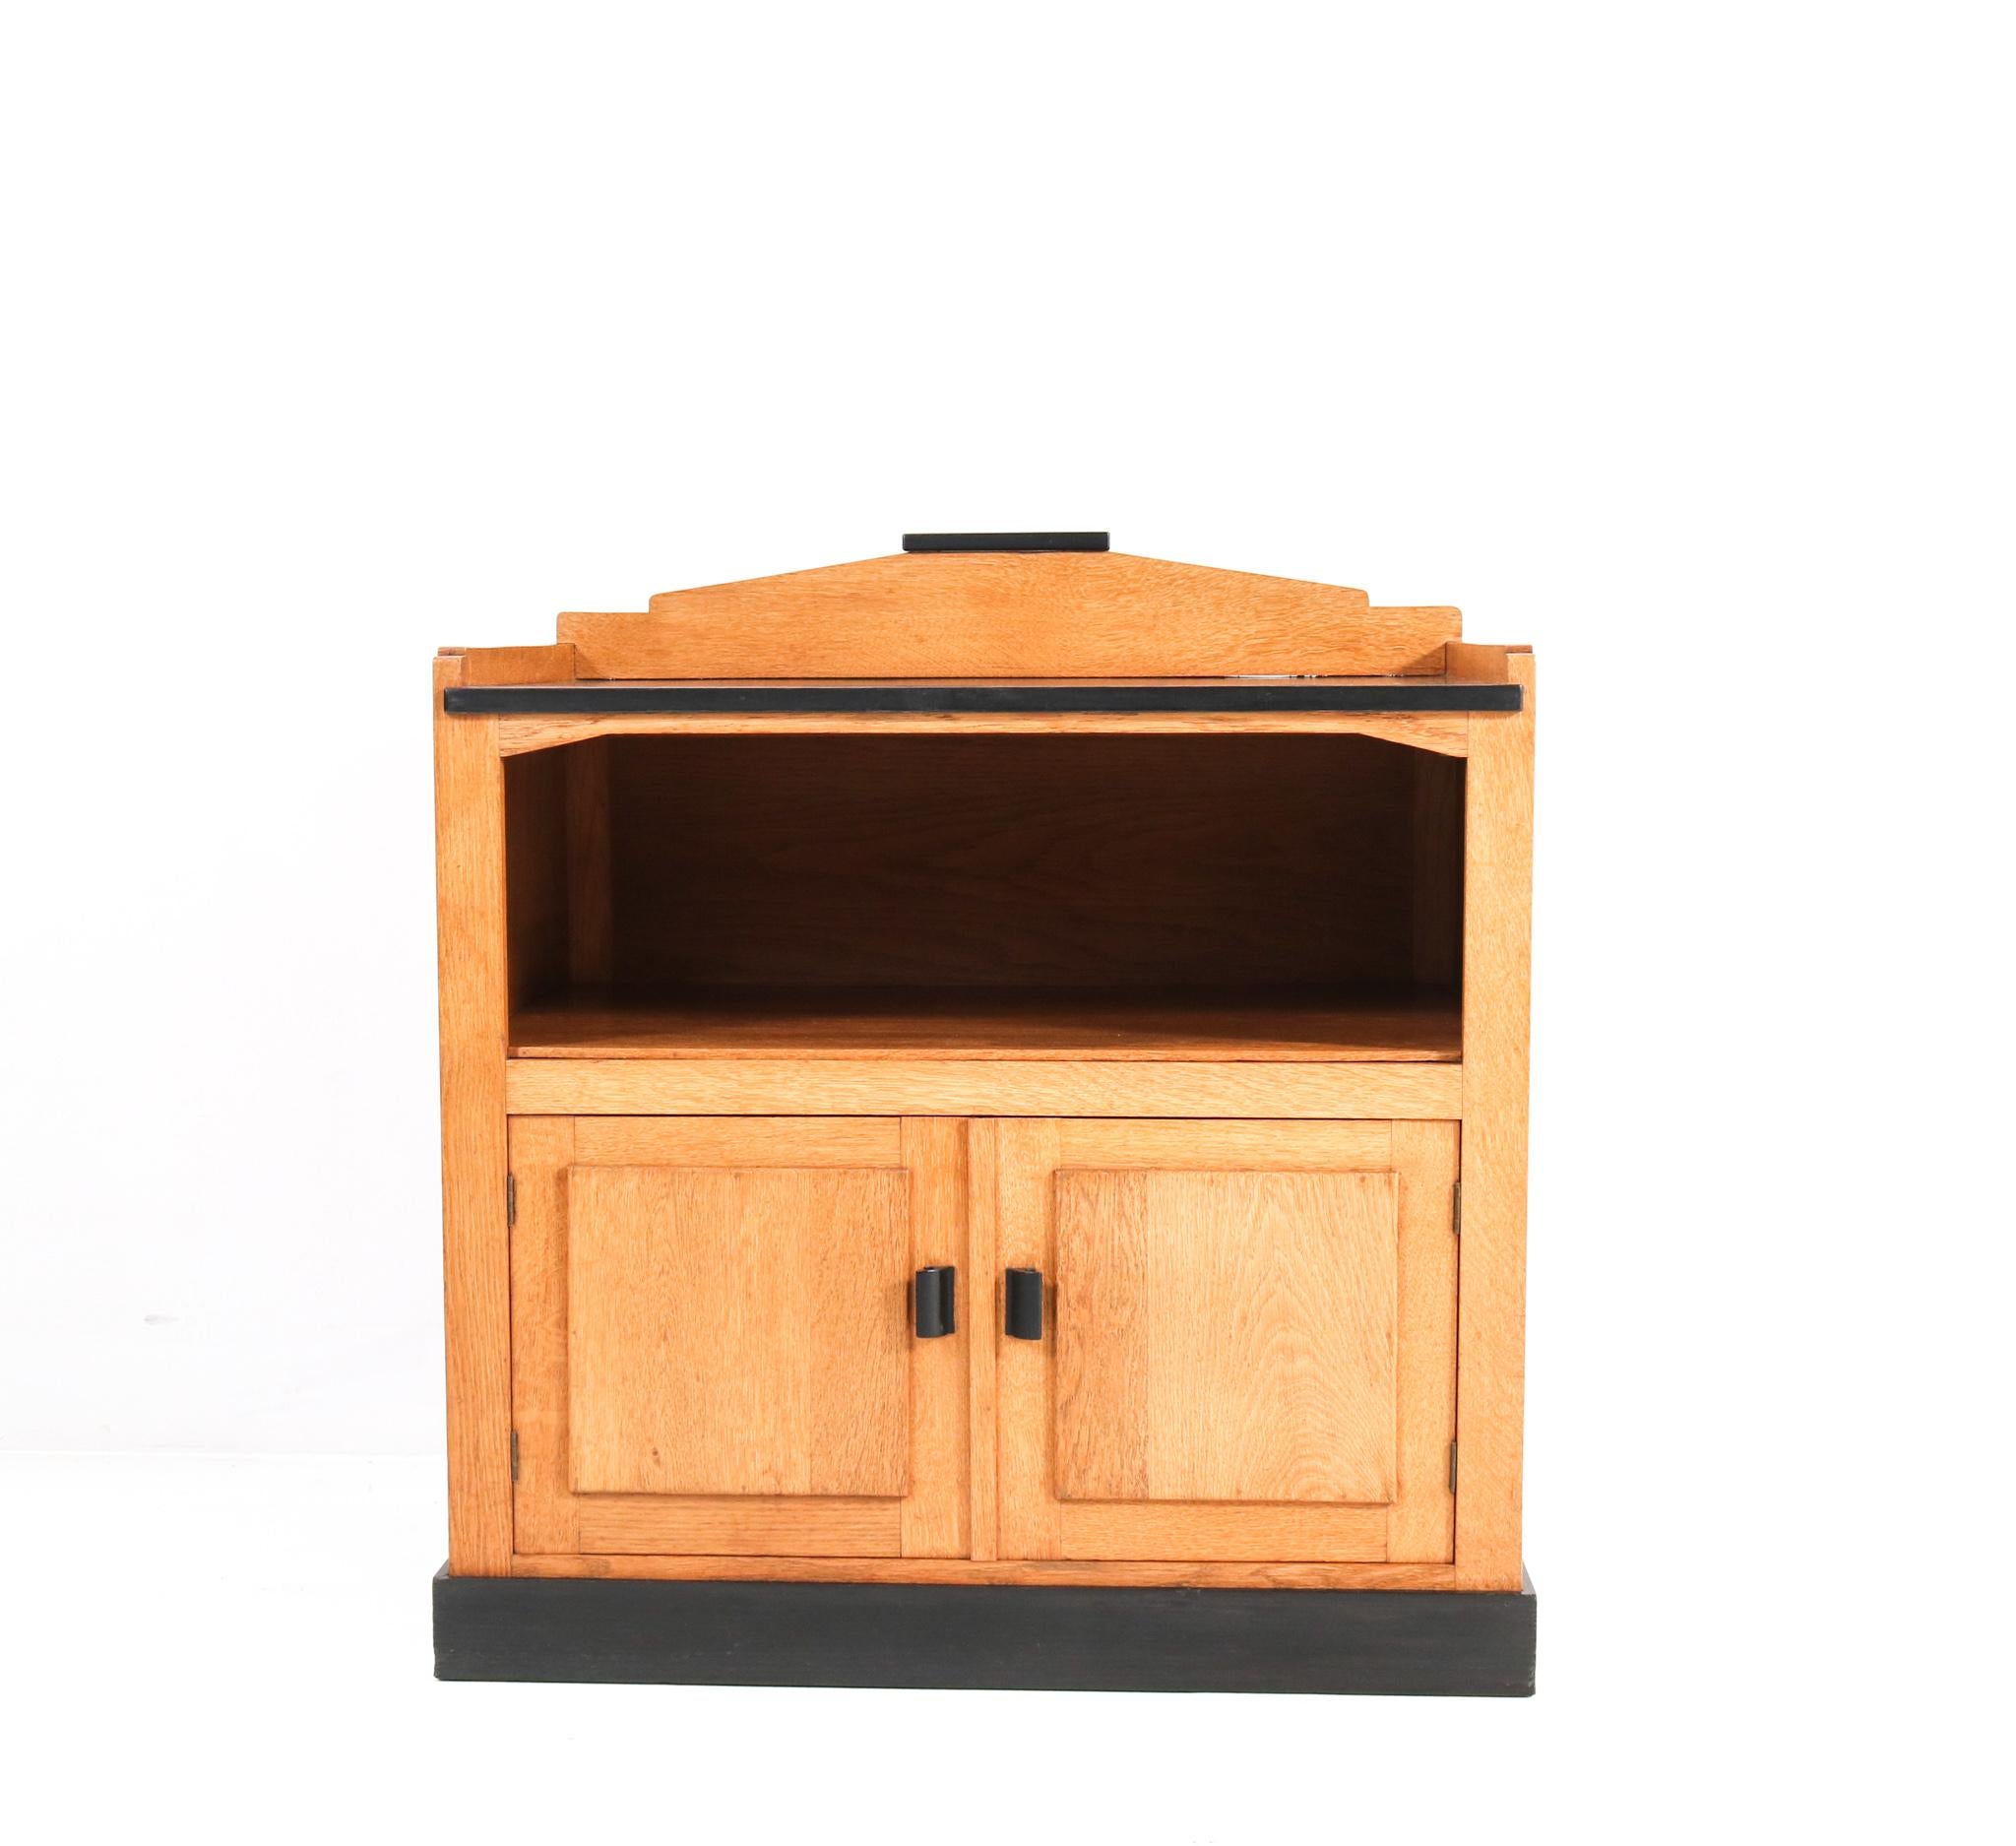 Magnificent and rare Art Deco Haagse School tea cabinet.
Design by Jan Brunott.
Striking Dutch design from the 1920s.
Solid oak with original black linoleum top.
Original black lacquered handles on the doors.
Rare because of the fact that its